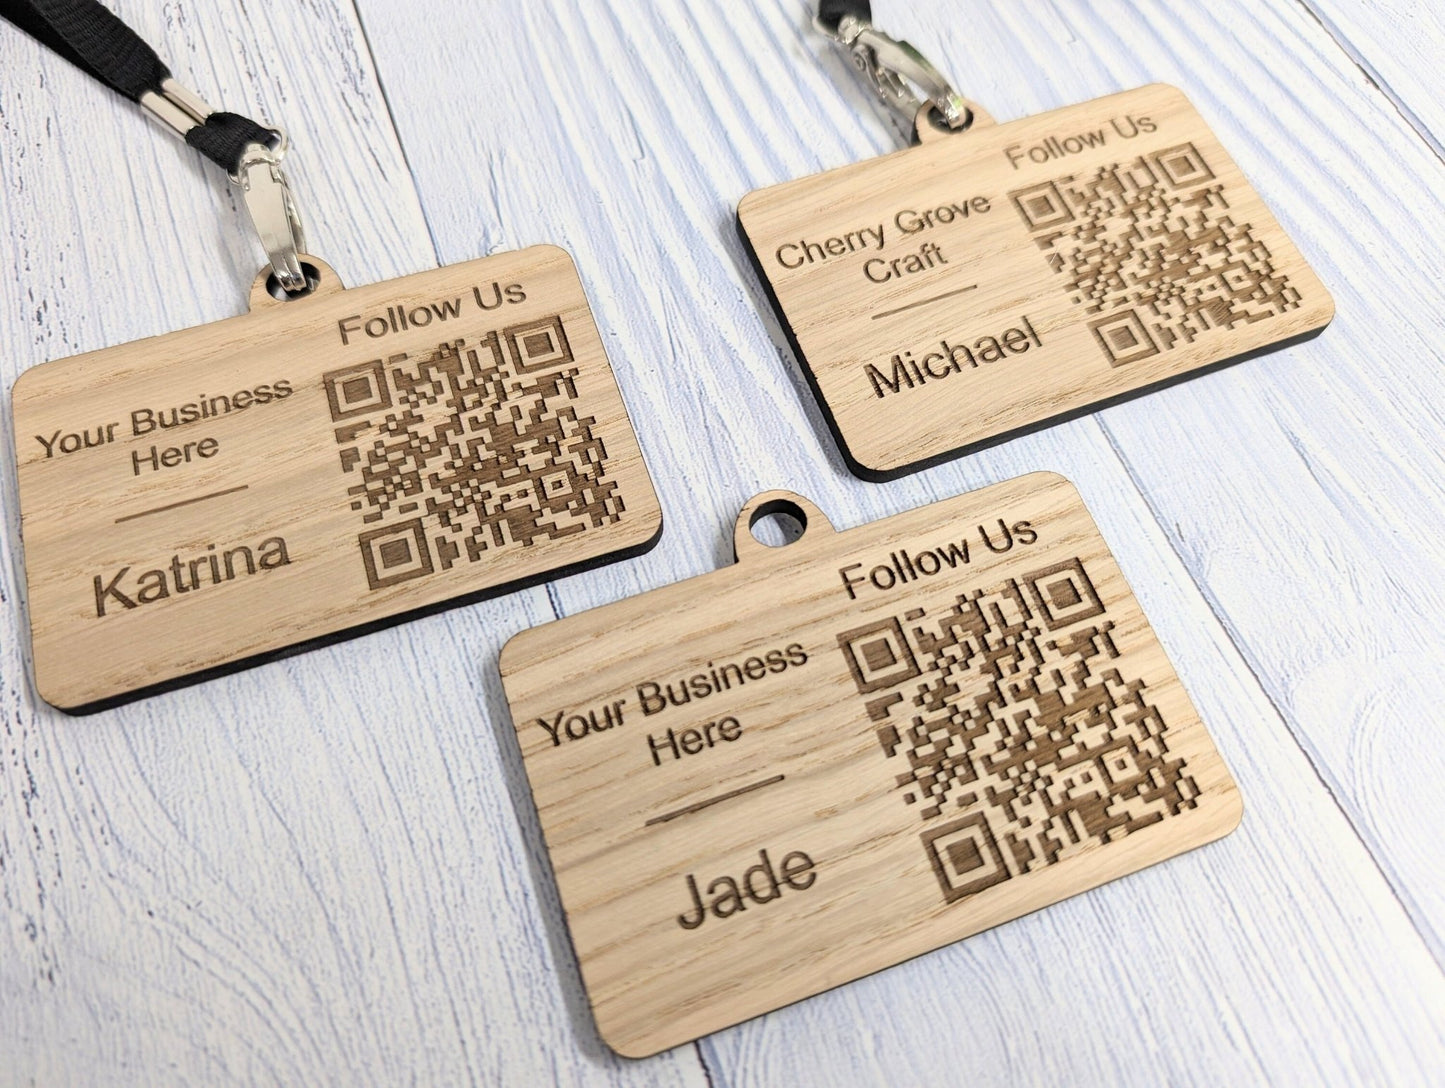 Interactive QR Code Eco-Friendly Name Badges with Eco Lanyards - Personalised Staff Name, Company Name or Logo - Event, Exhibition Badges - CherryGroveCraft